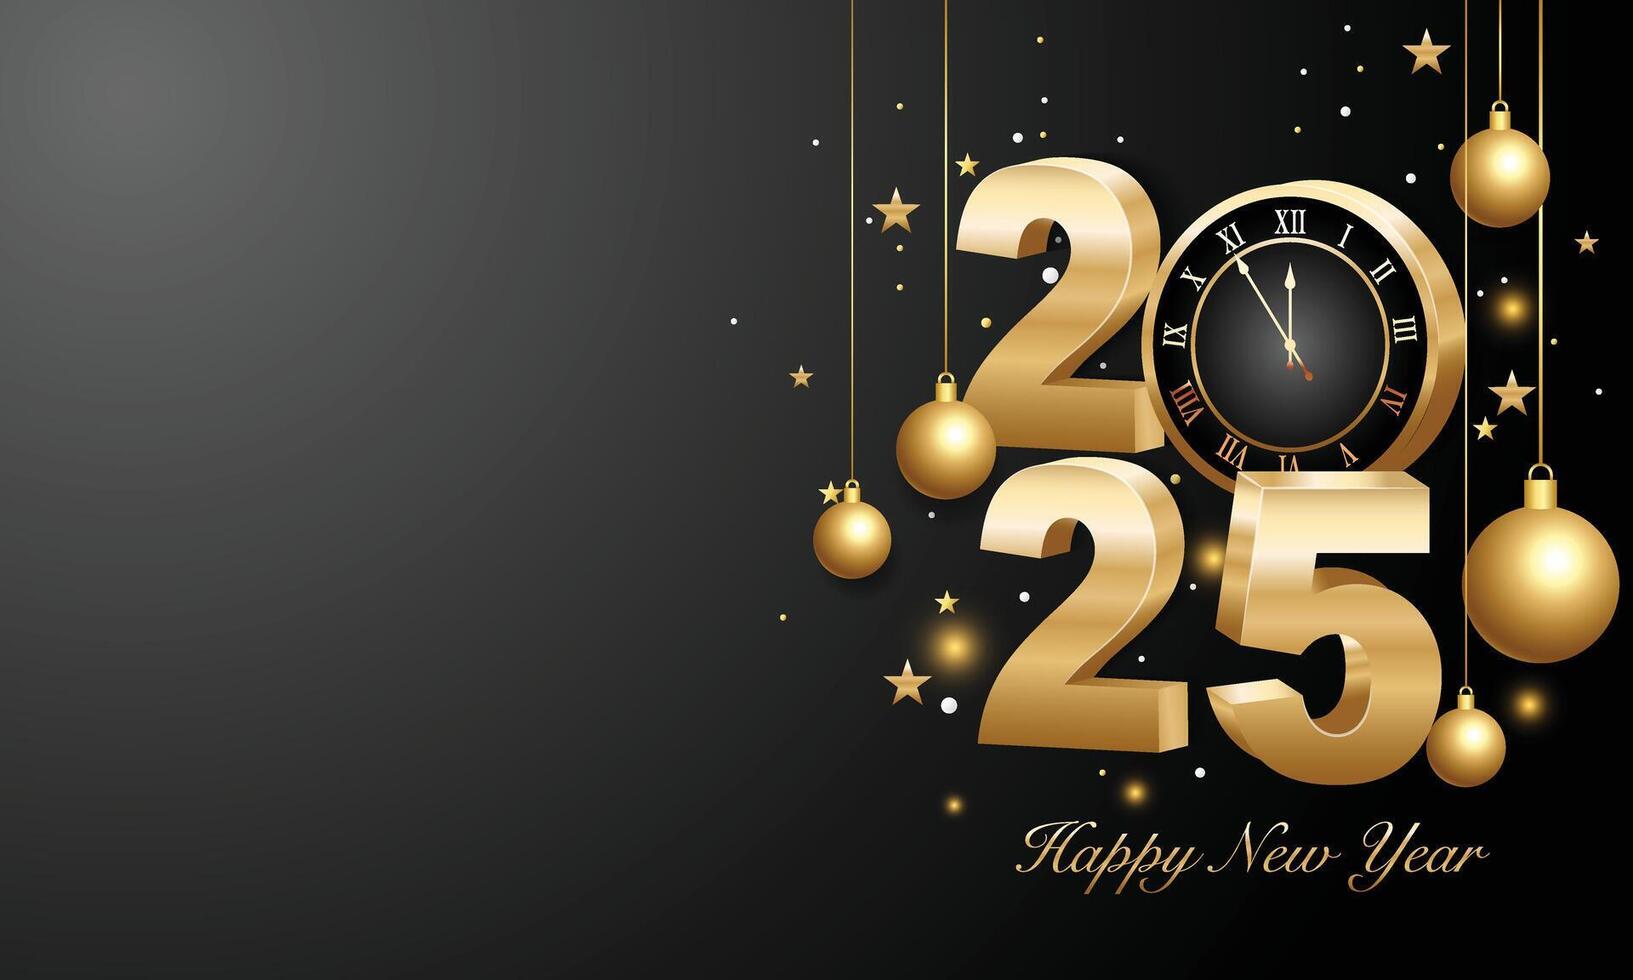 Happy new year 2025. 3d gold numbers with golden Christmas decoration and confetti on dark  background. Holiday greeting card design. vector